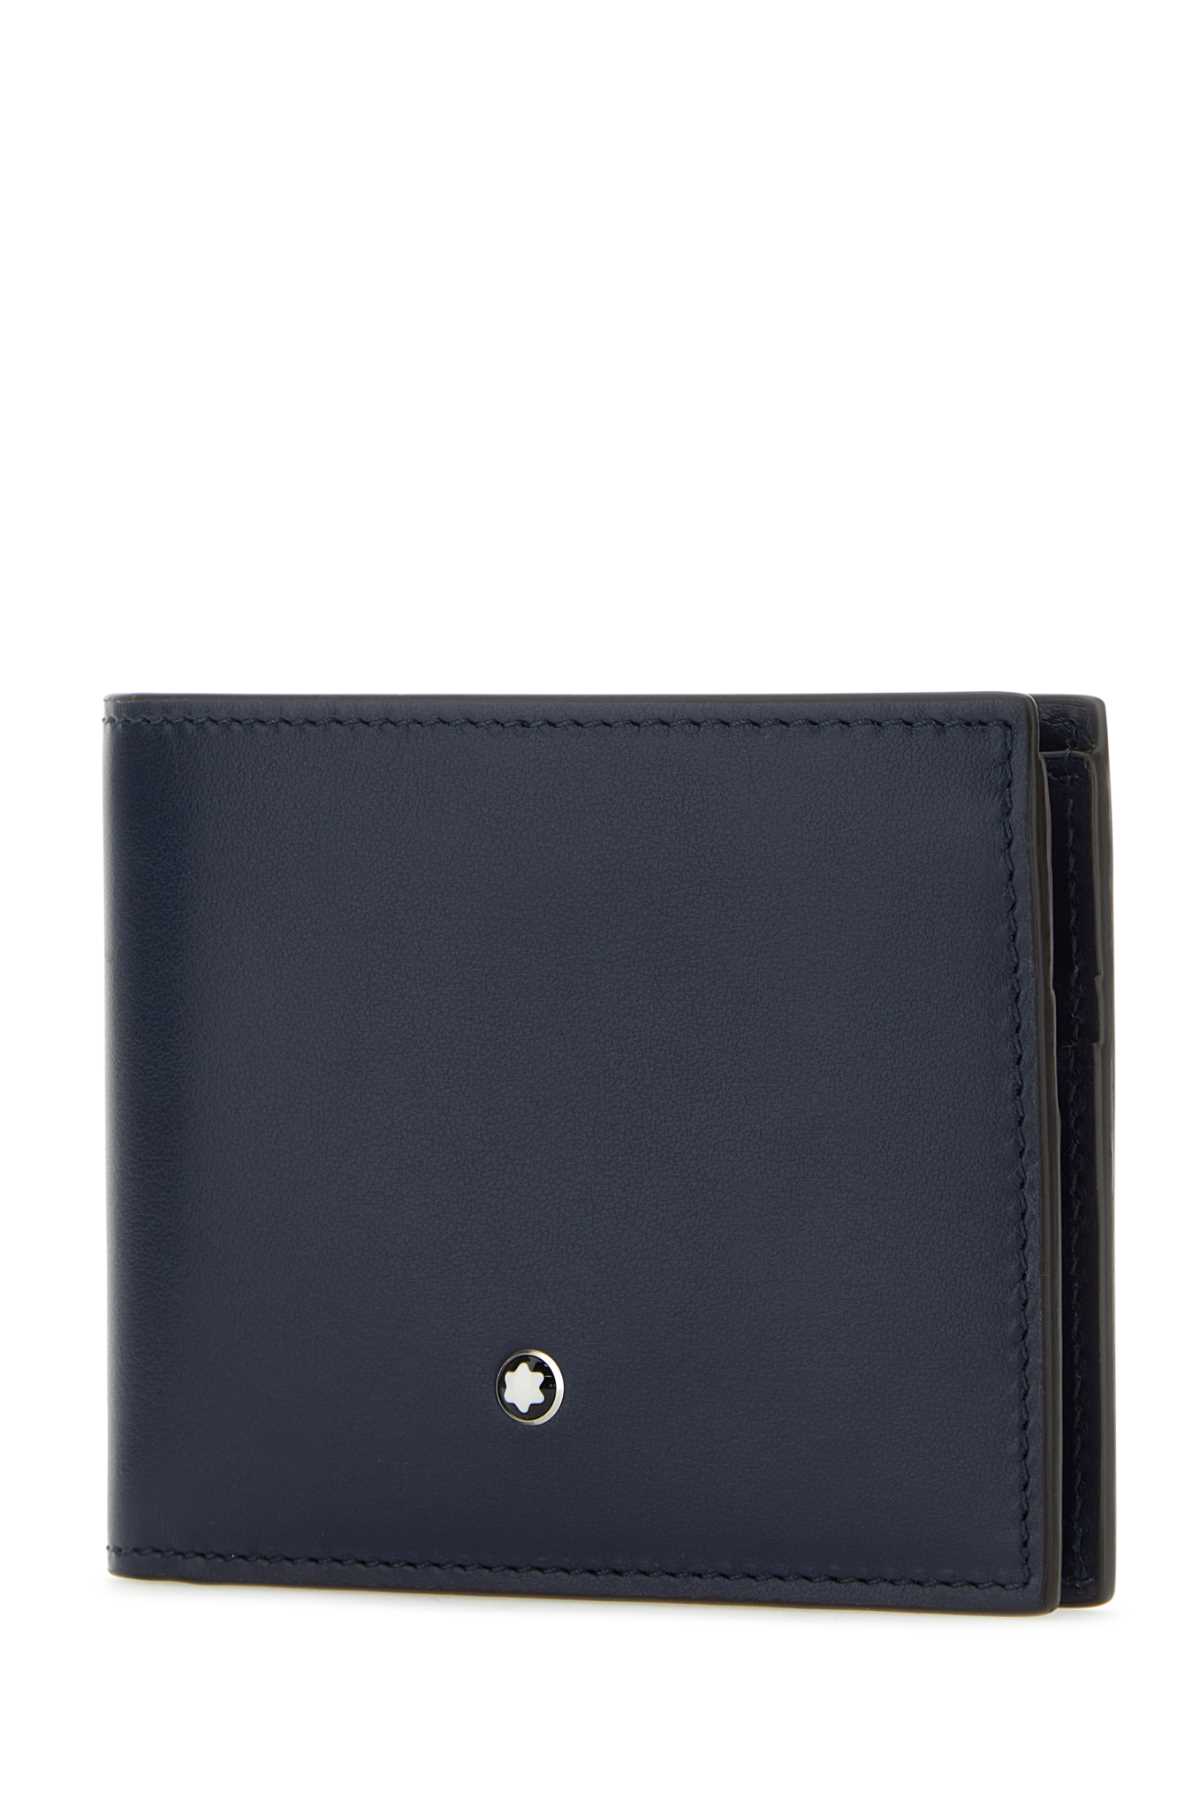 Shop Montblanc Navy Blue Leather Wallet In Inkblue